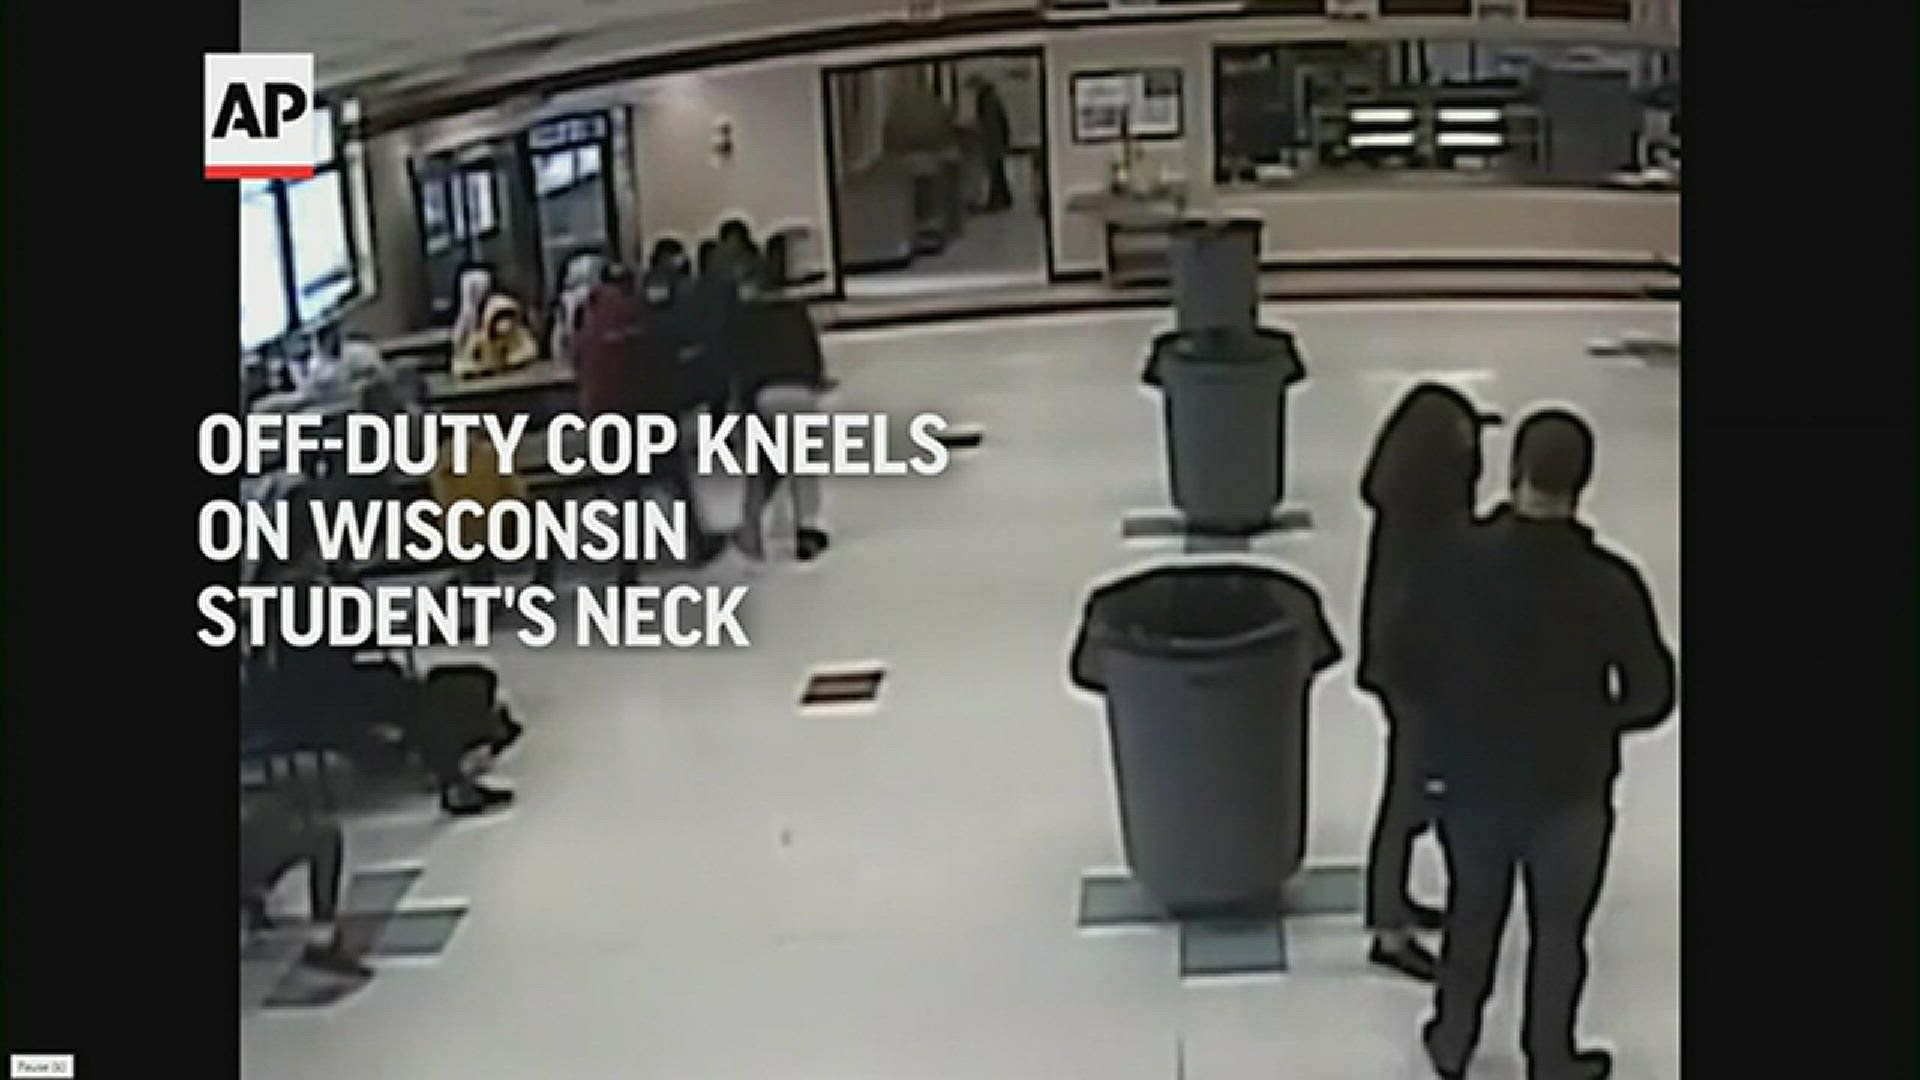 School officials in Kenosha released surveillance footage that shows an off-duty police officer putting his knee on a 12-year-old girl's neck to restrain her.